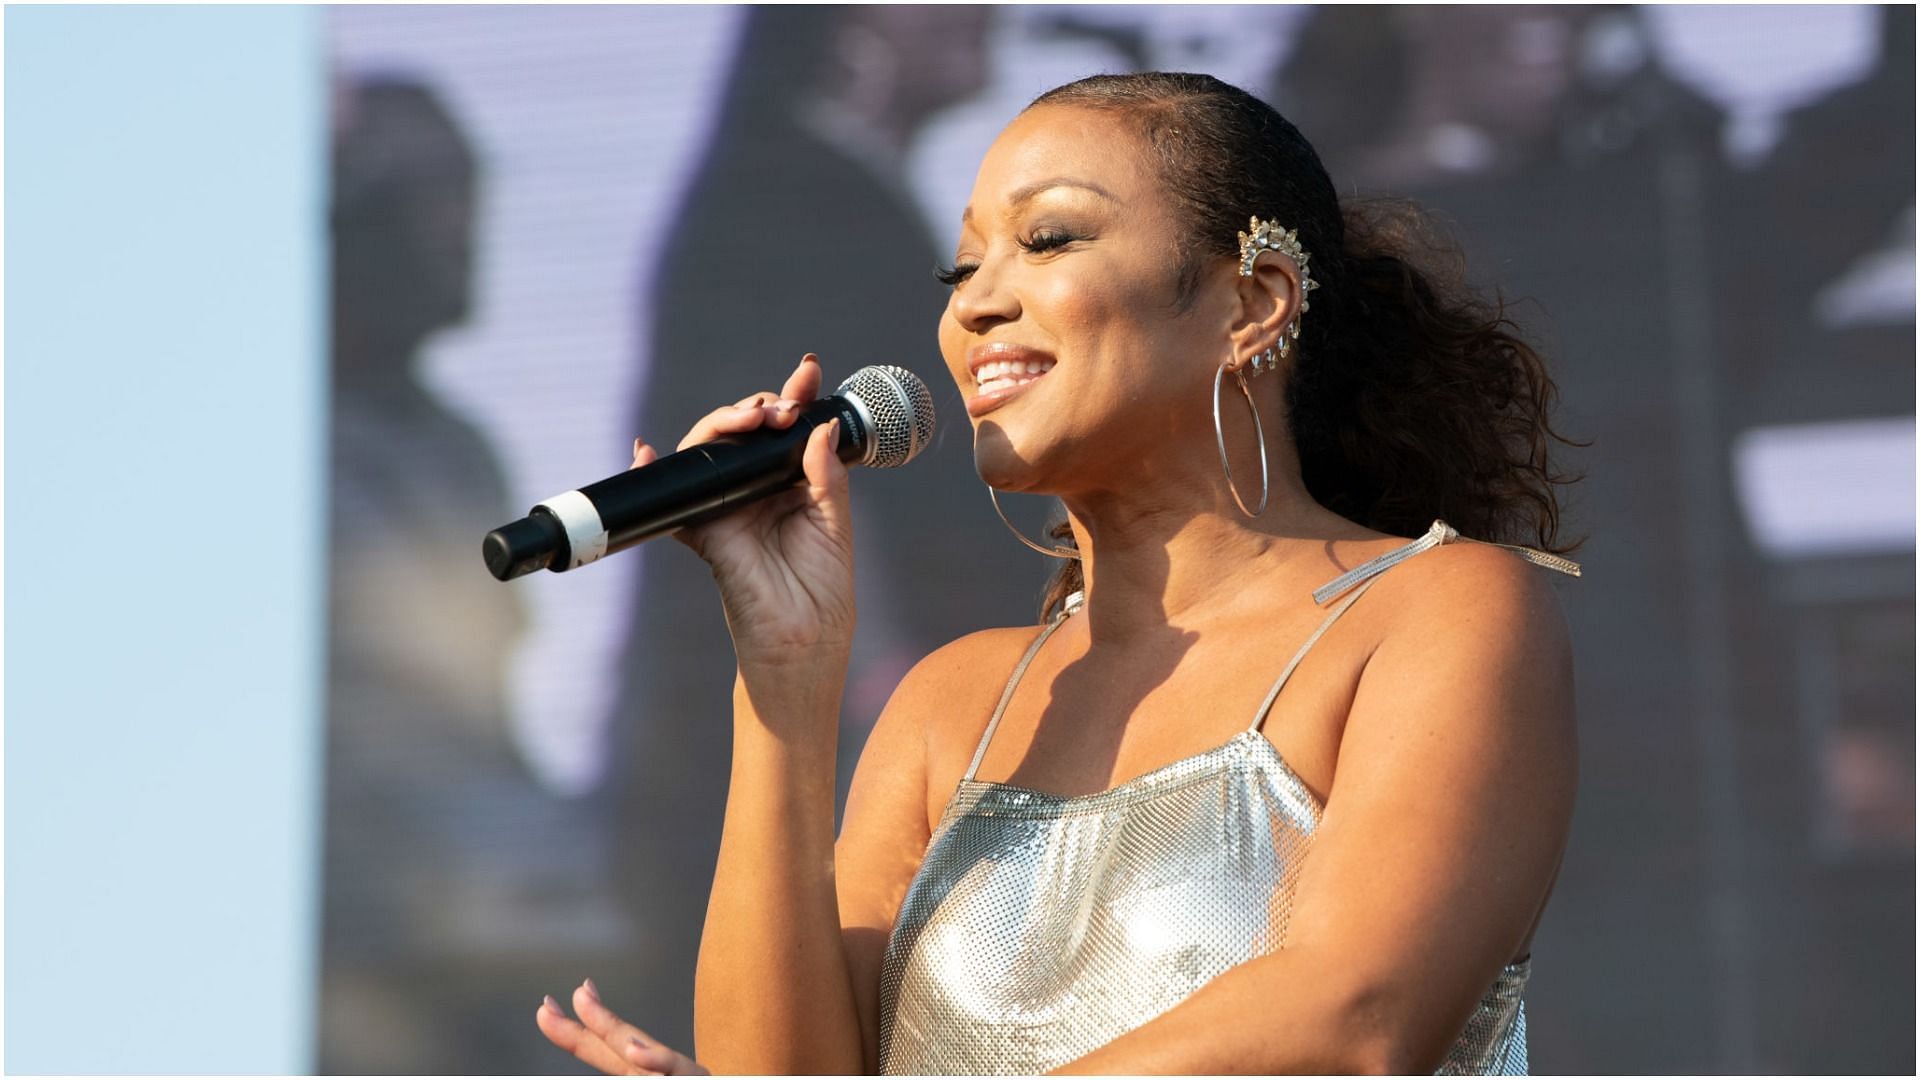 Chante Moore performs at the 31st Annual Long Beach Jazz Festival at Rainbow Lagoon Park on August 11, 2018 in Long Beach, California. (Image via Getty Images)